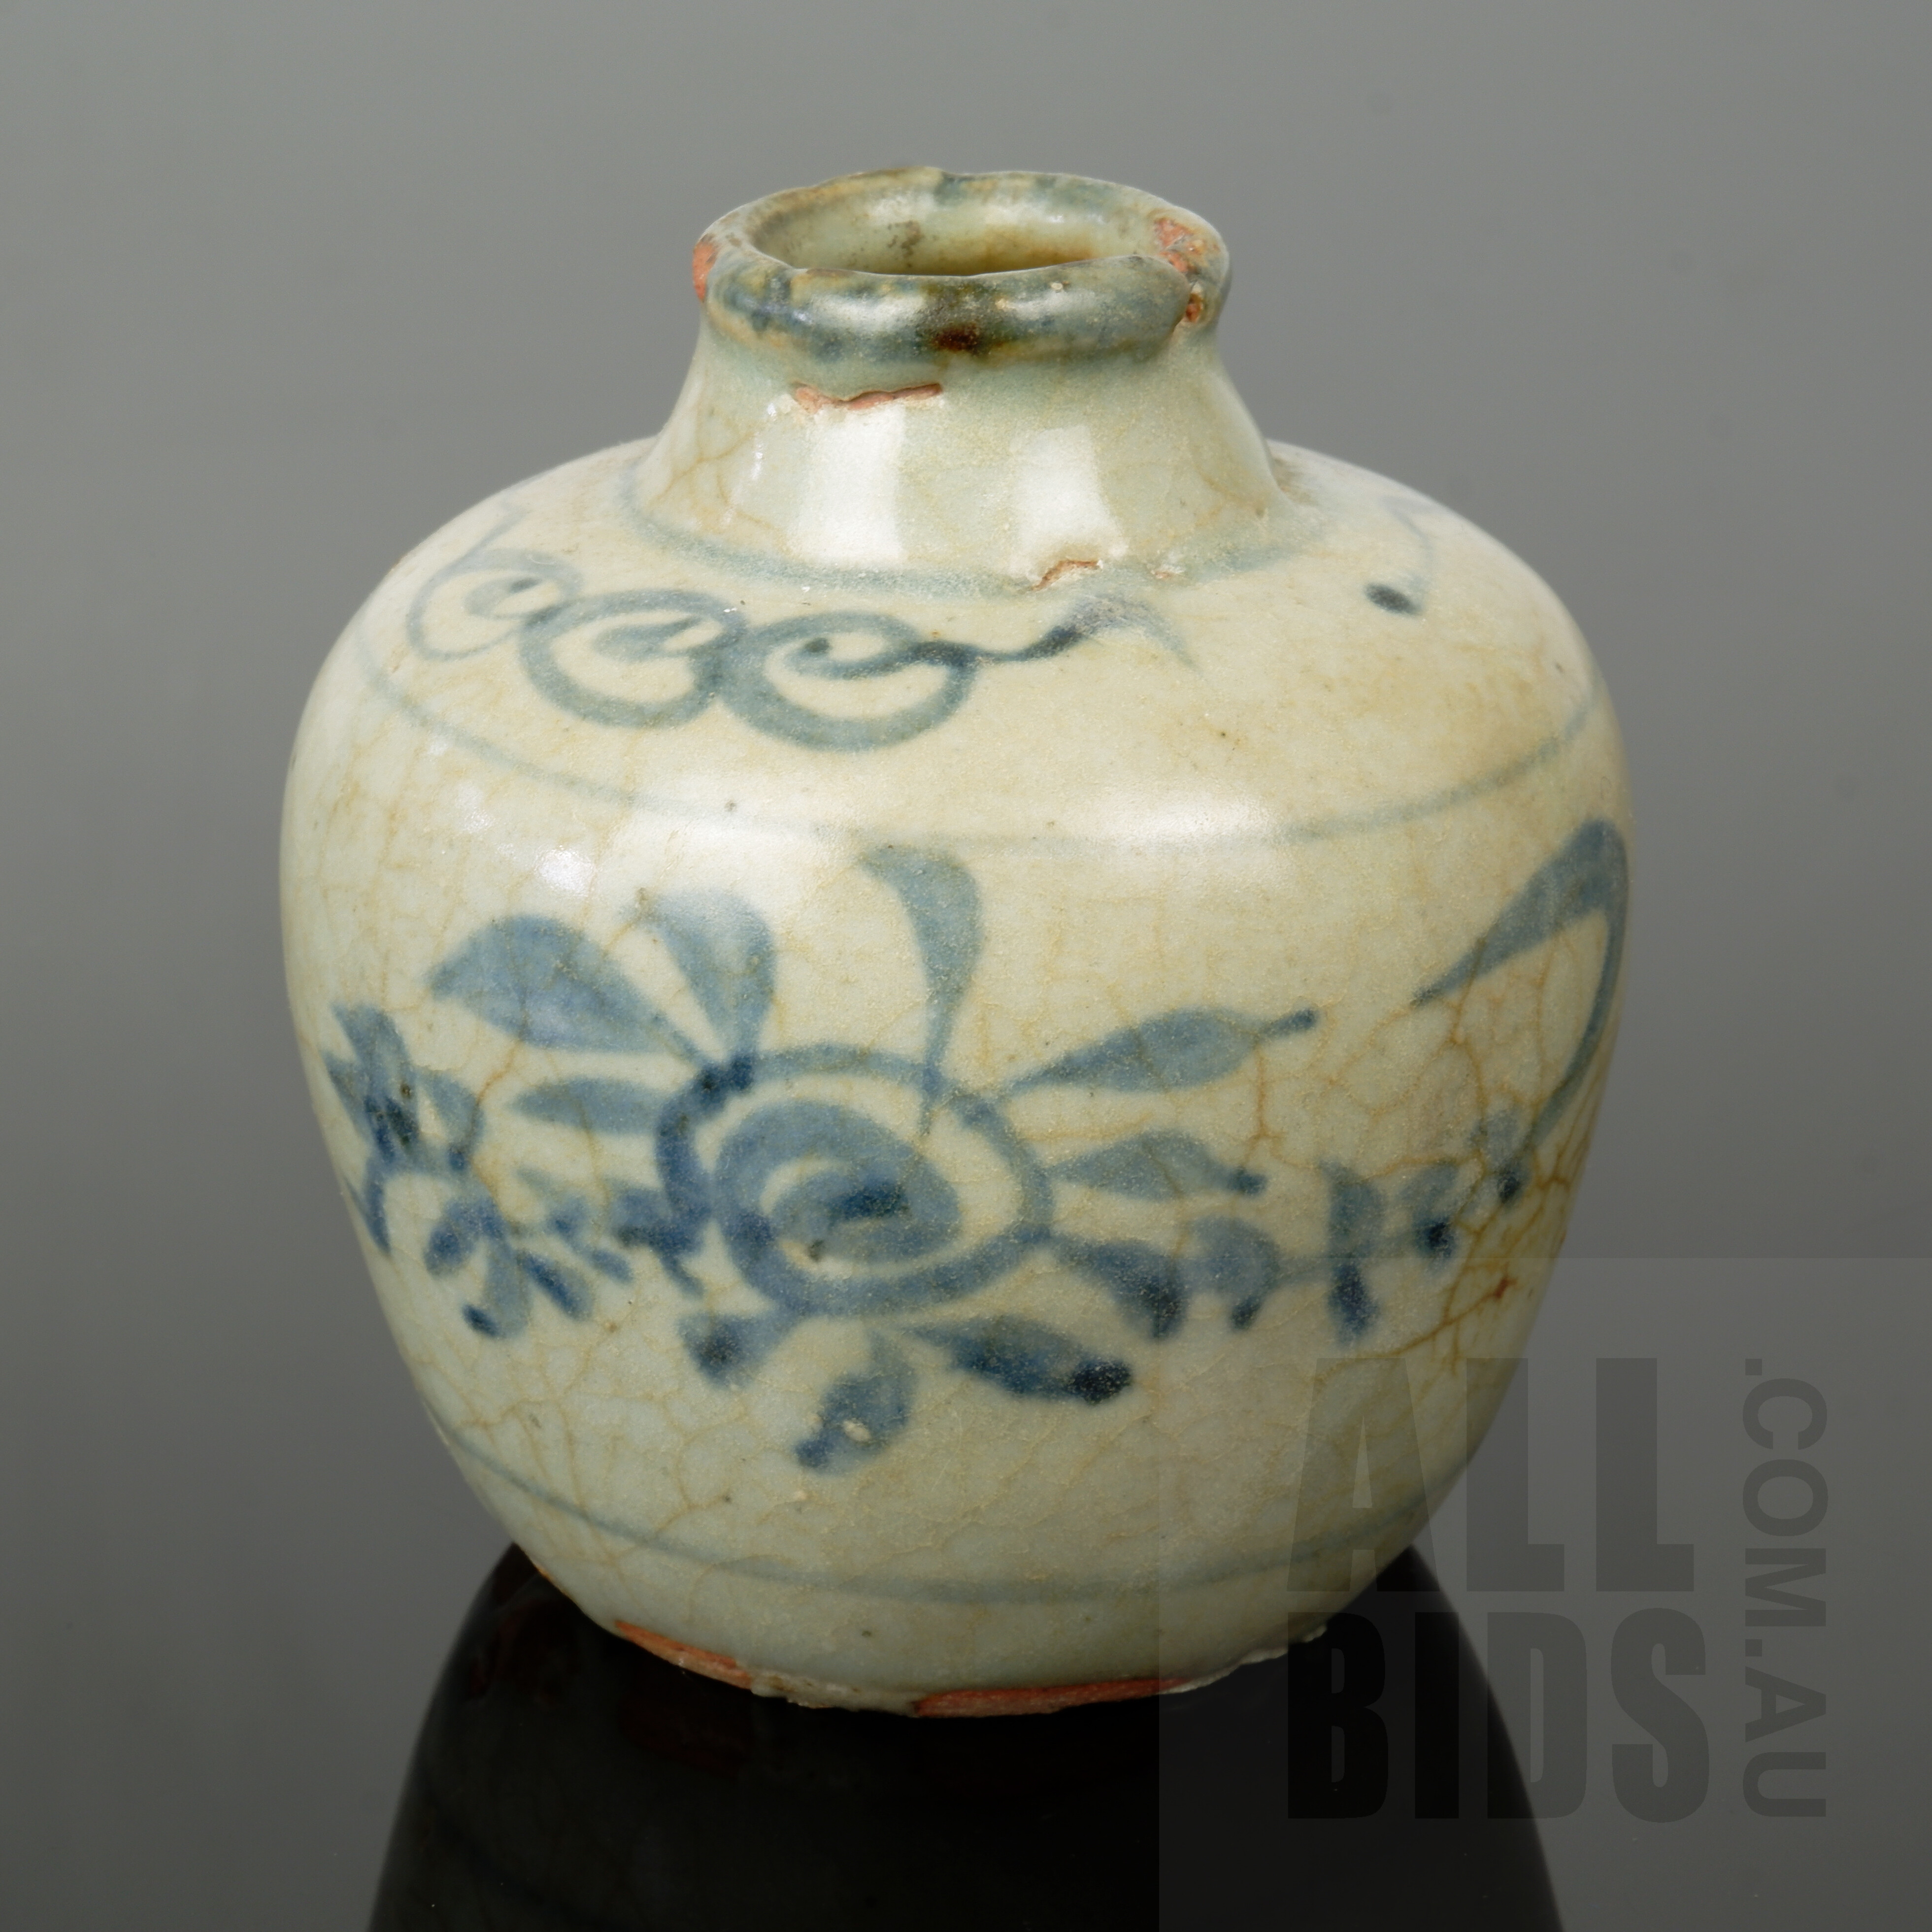 'Chinese Late Ming Swatow Ware Blue and White Jarlet, 16th-17th Century'